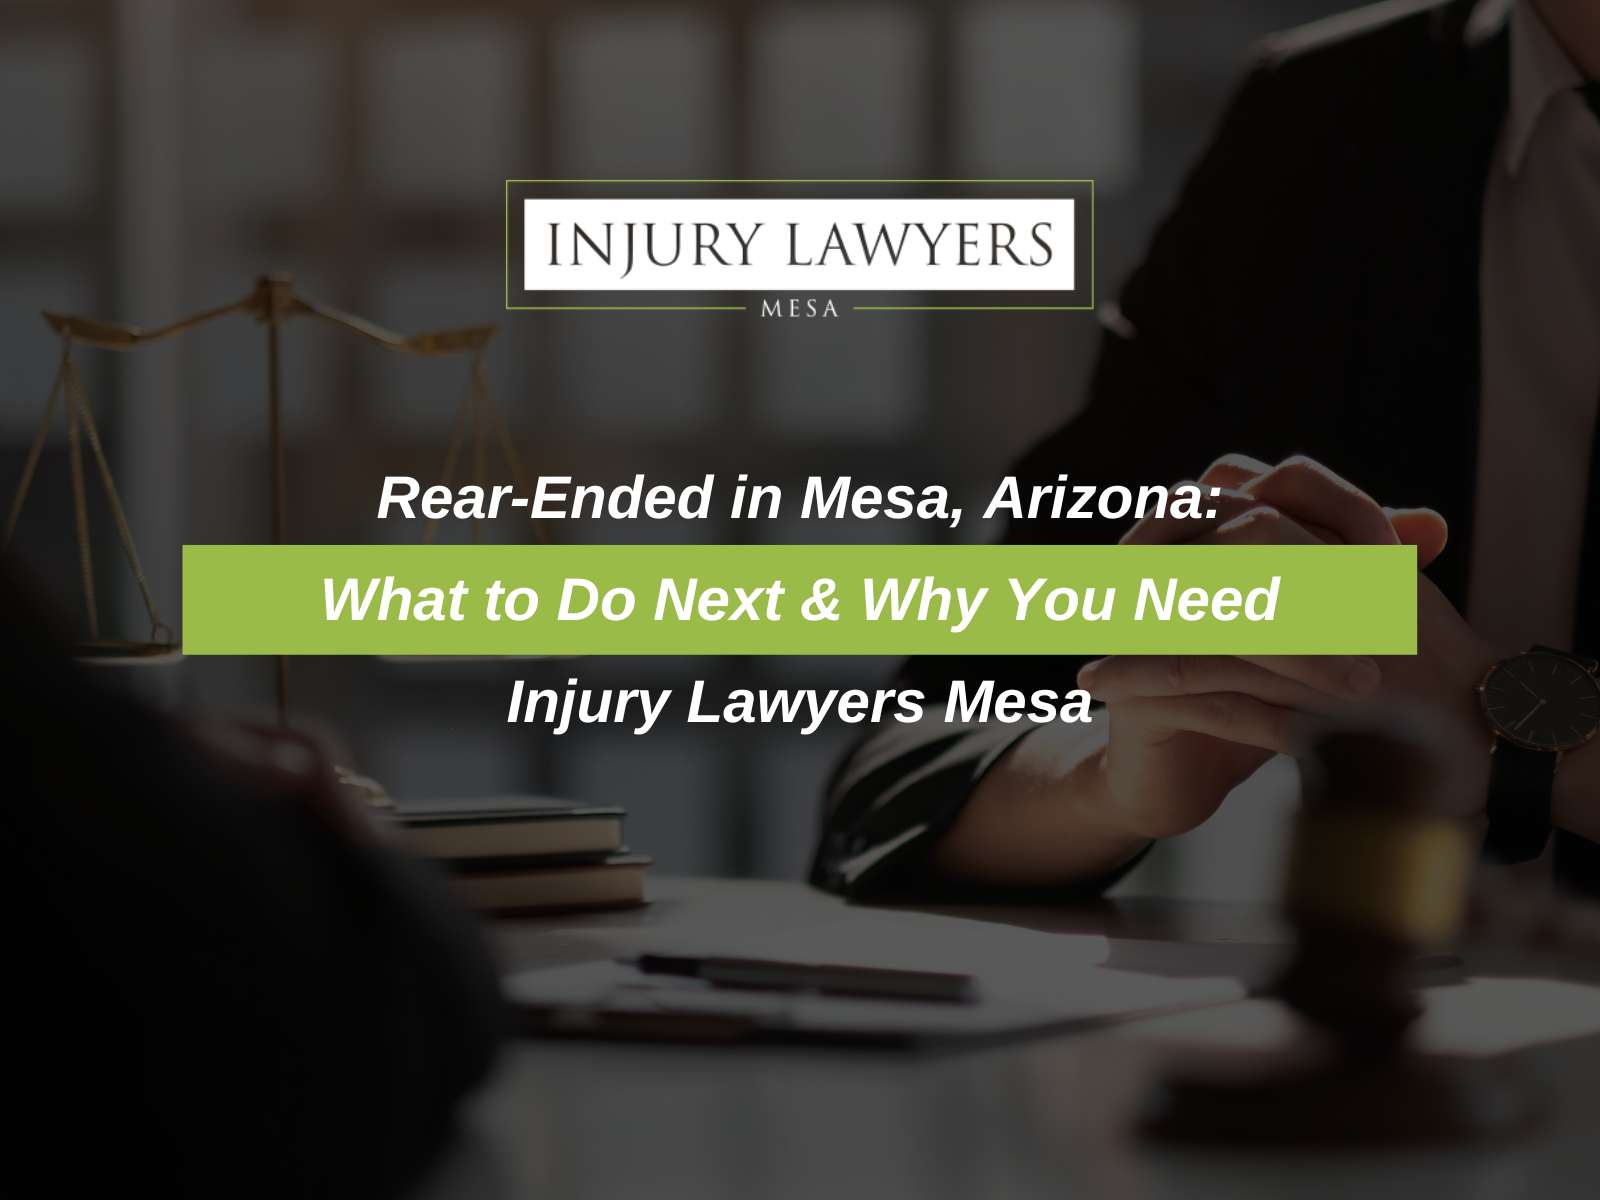 Rear-Ended in Mesa, Arizona: What to Do Next & Why You Need Injury Lawyers Mesa